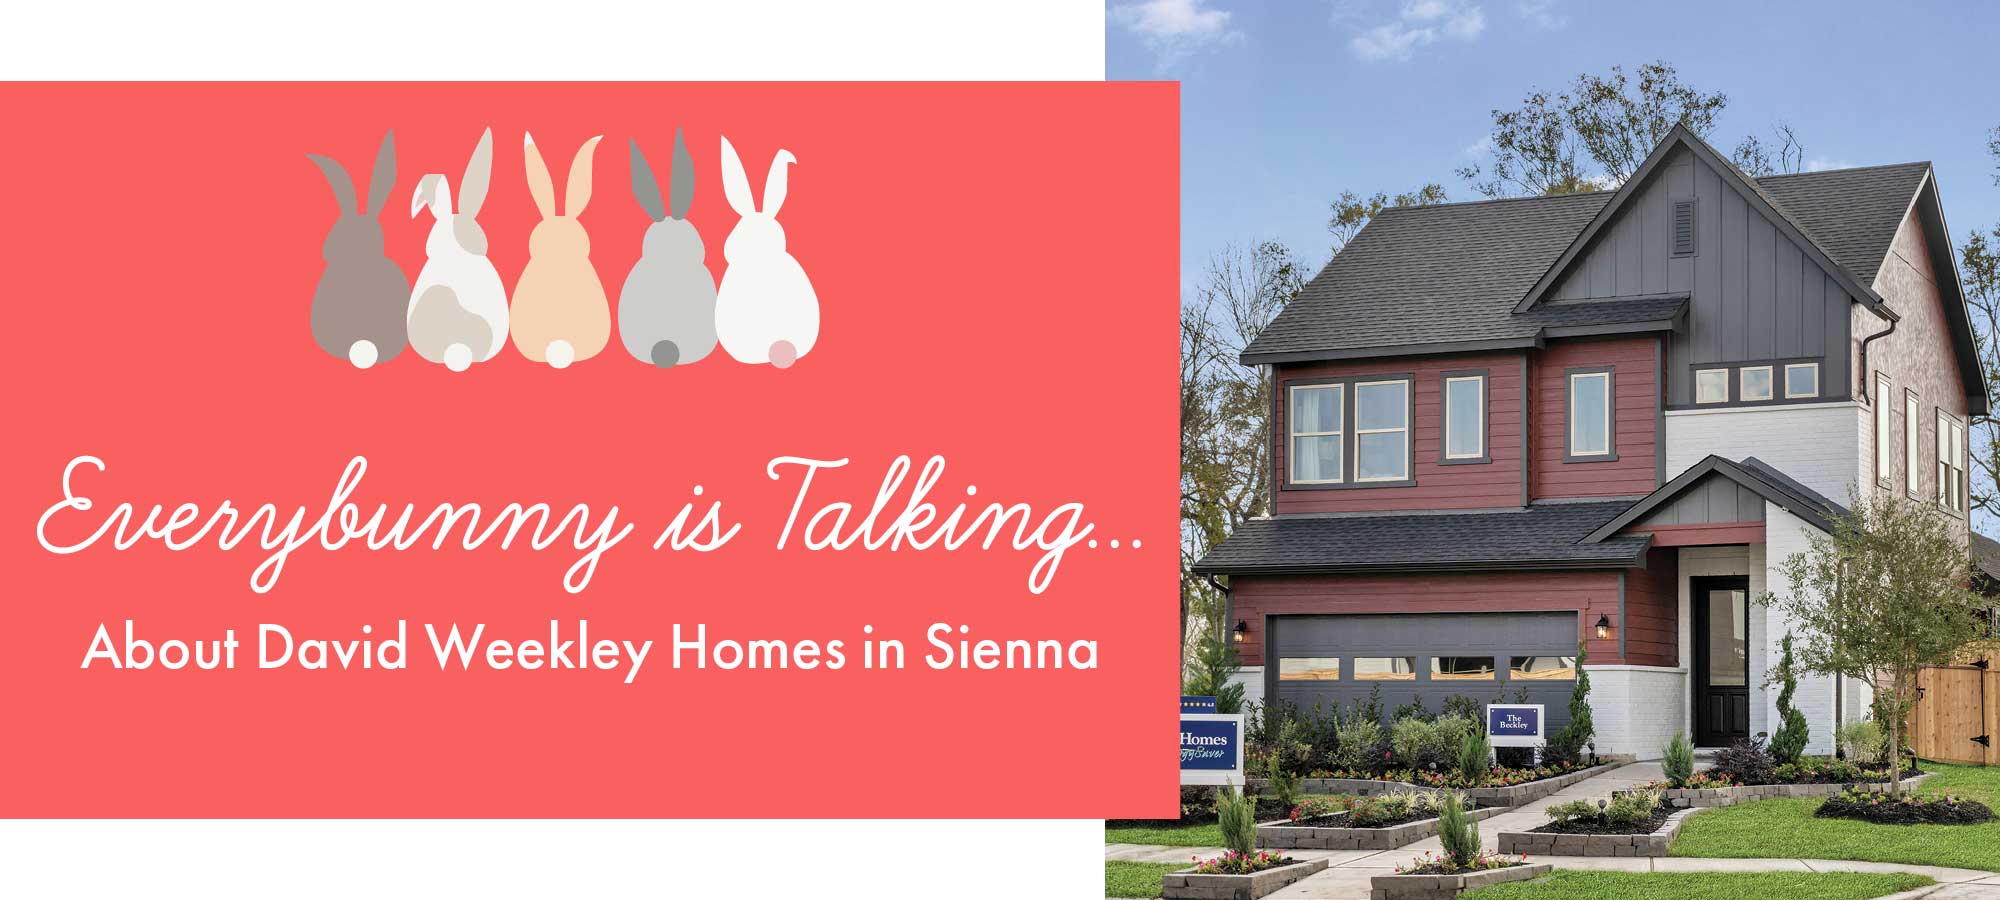 Every Bunny is Talking About David Weekley Homes in Sienna